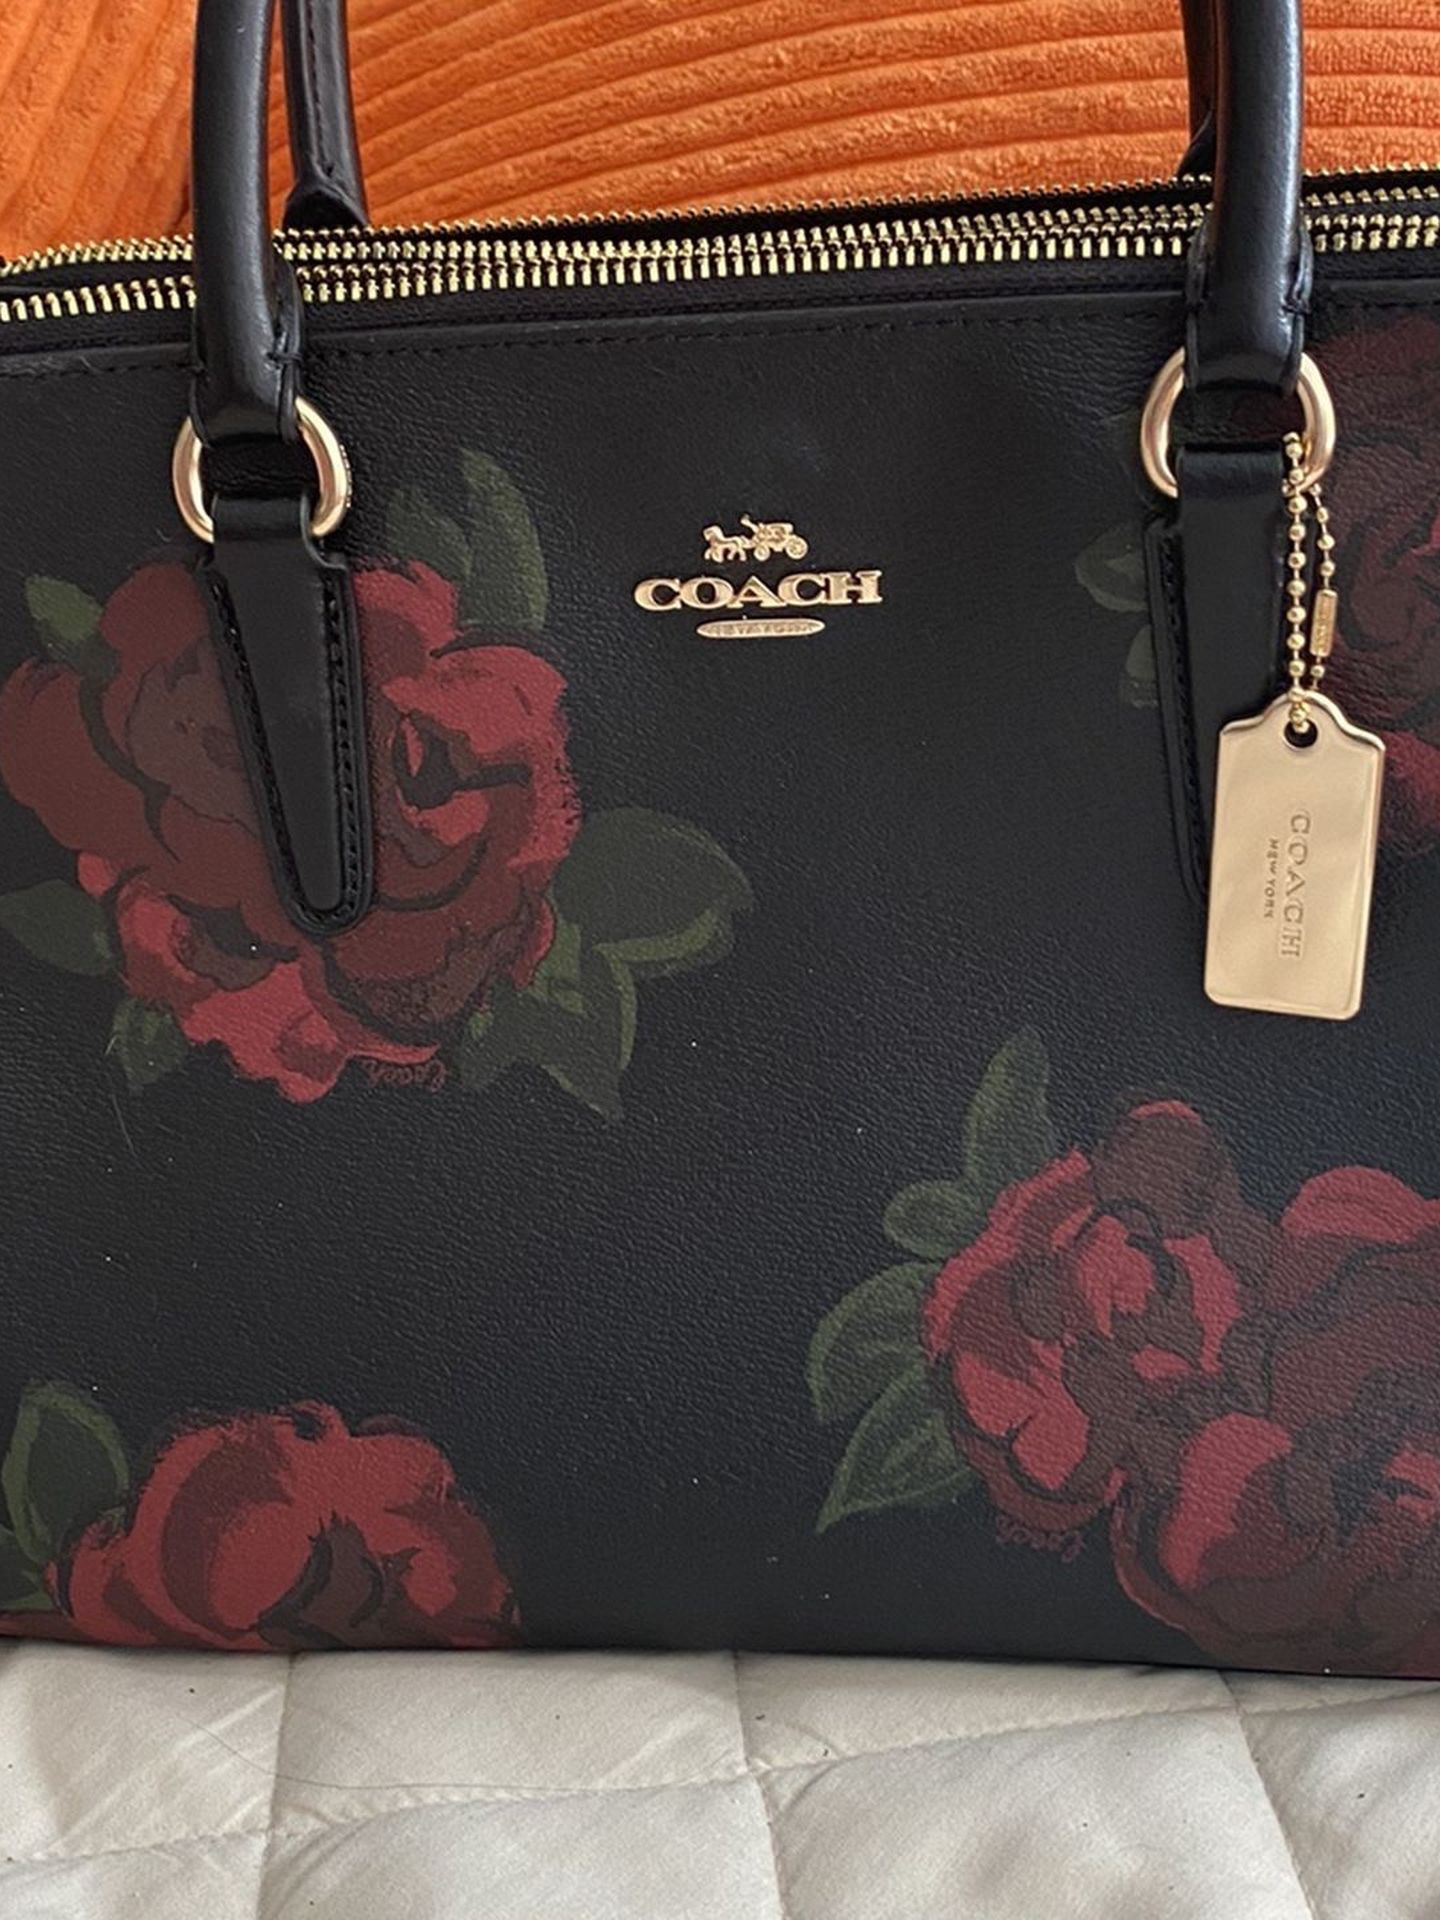 Coach Cherry bag Charm for Sale in Arlington, TX - OfferUp